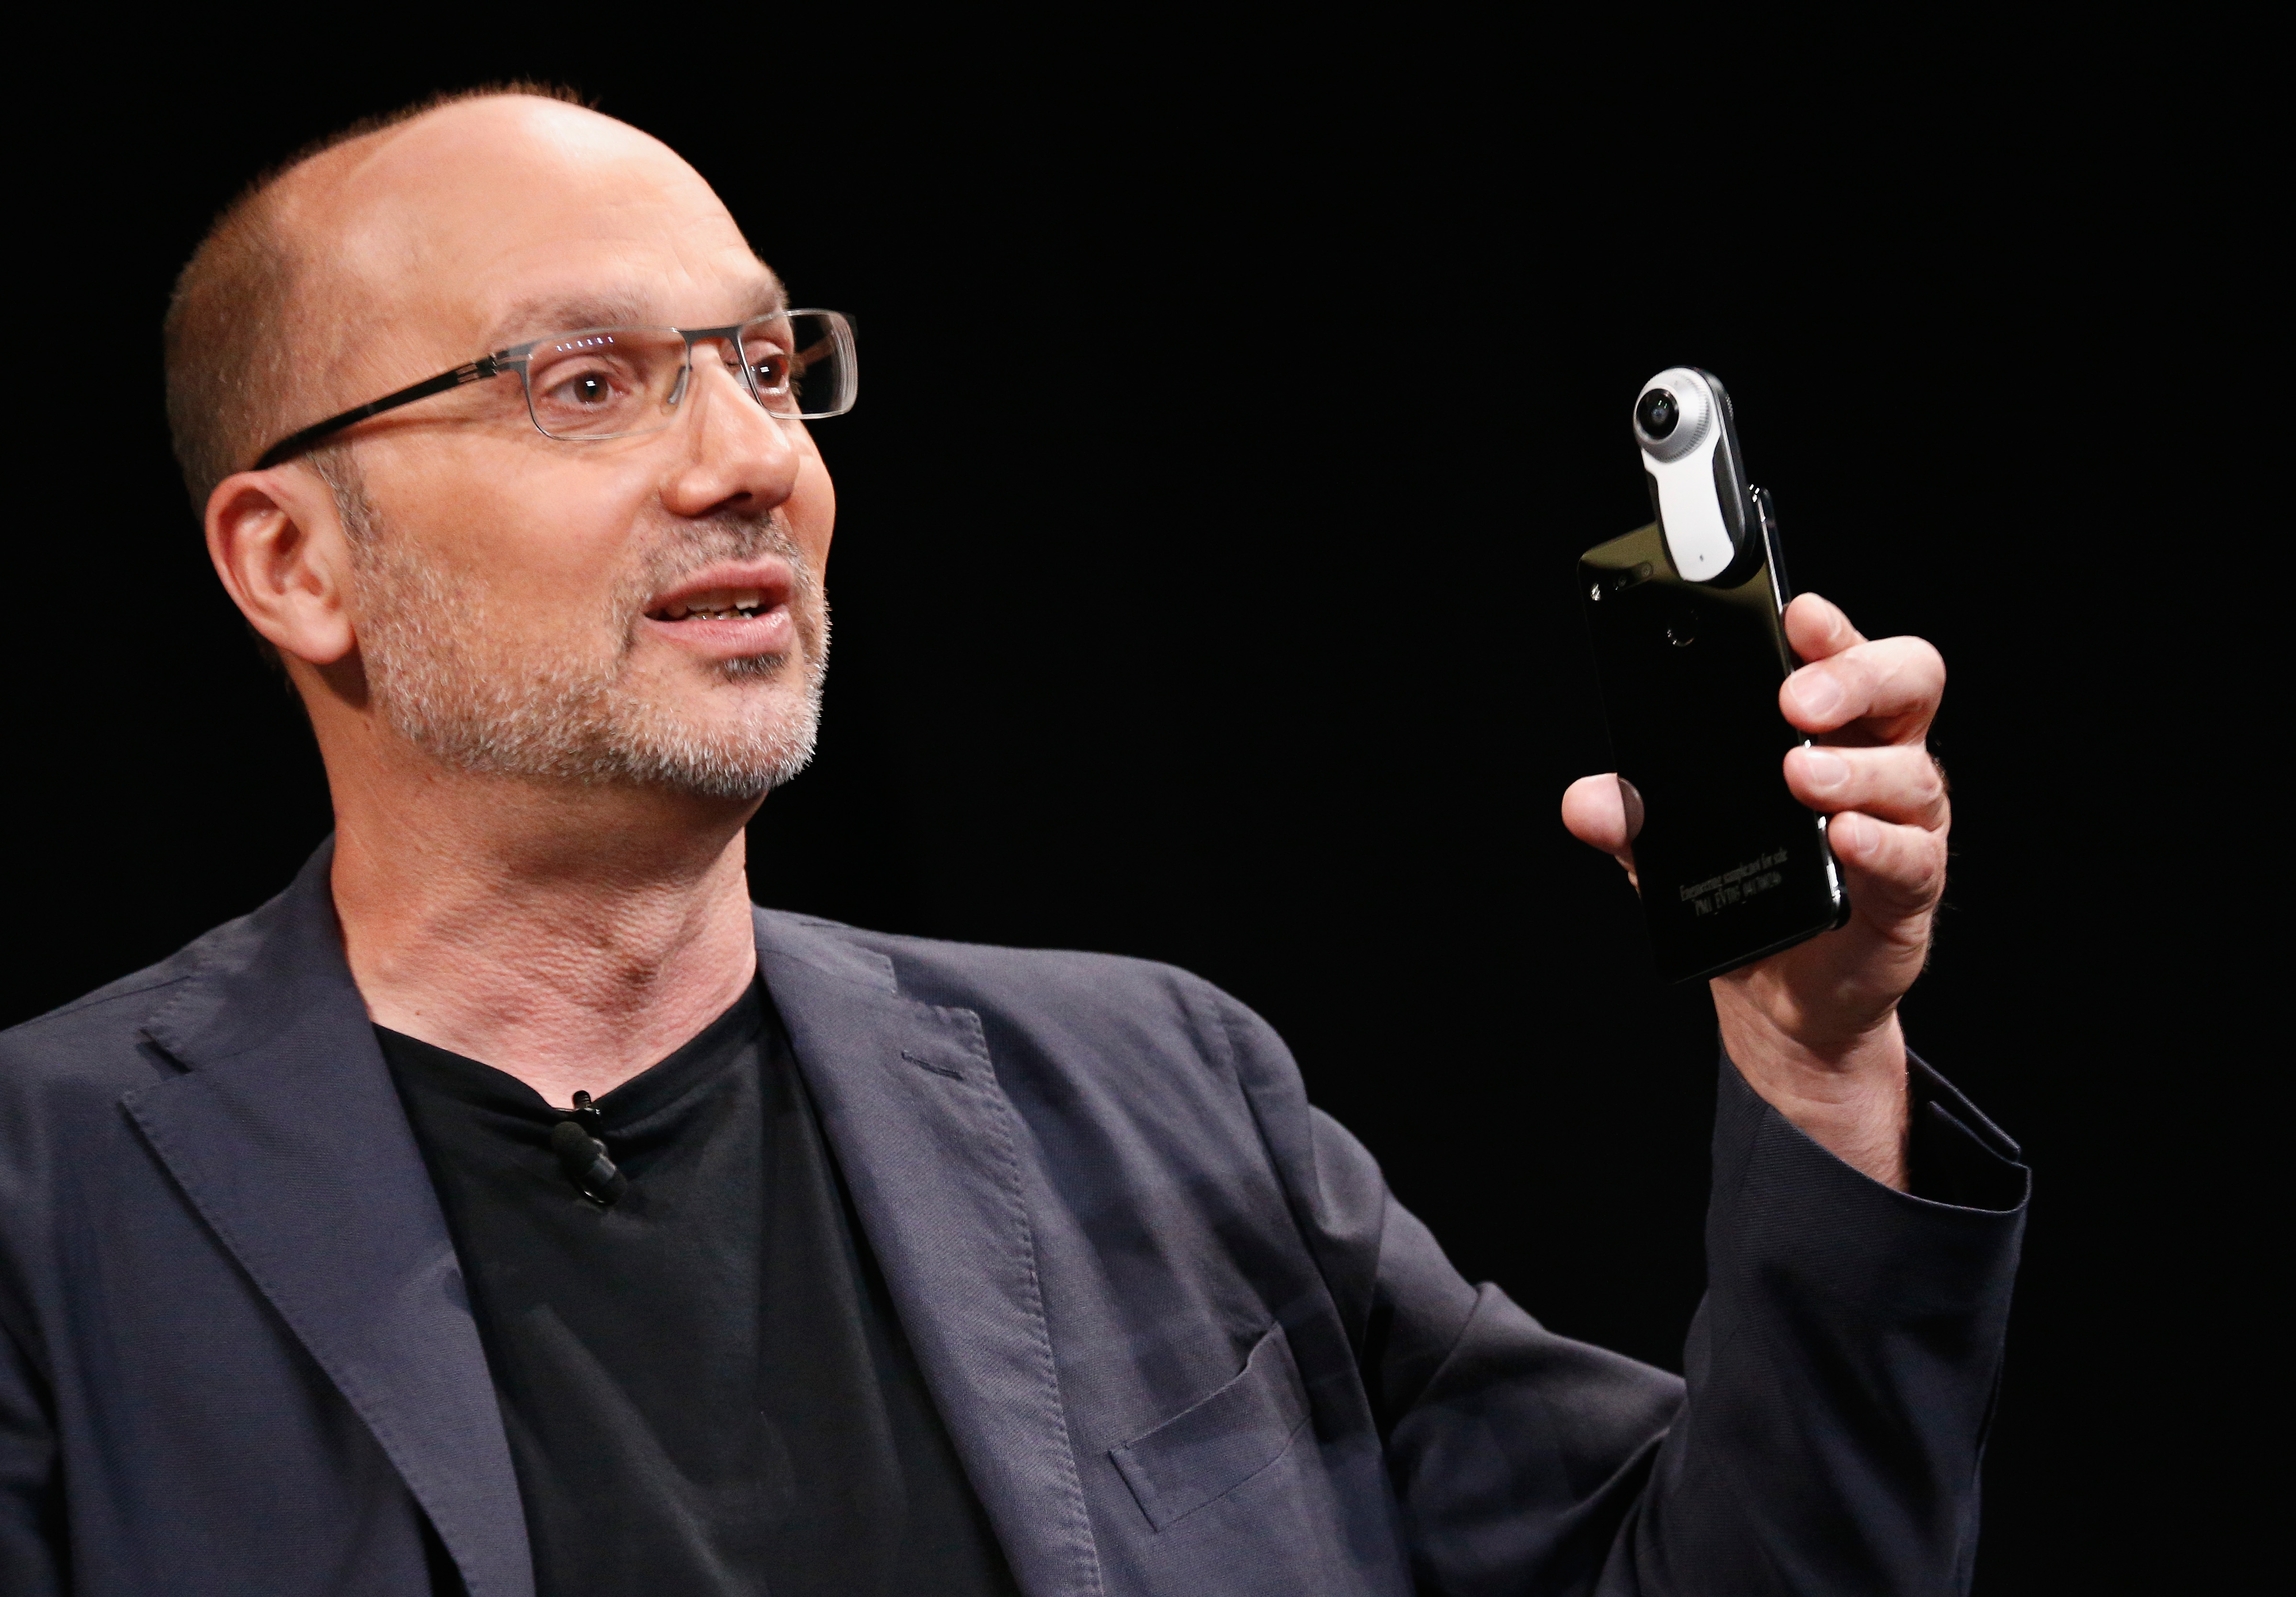 Andy Rubin received a massive payout from Google following a sexual misconduct allegation